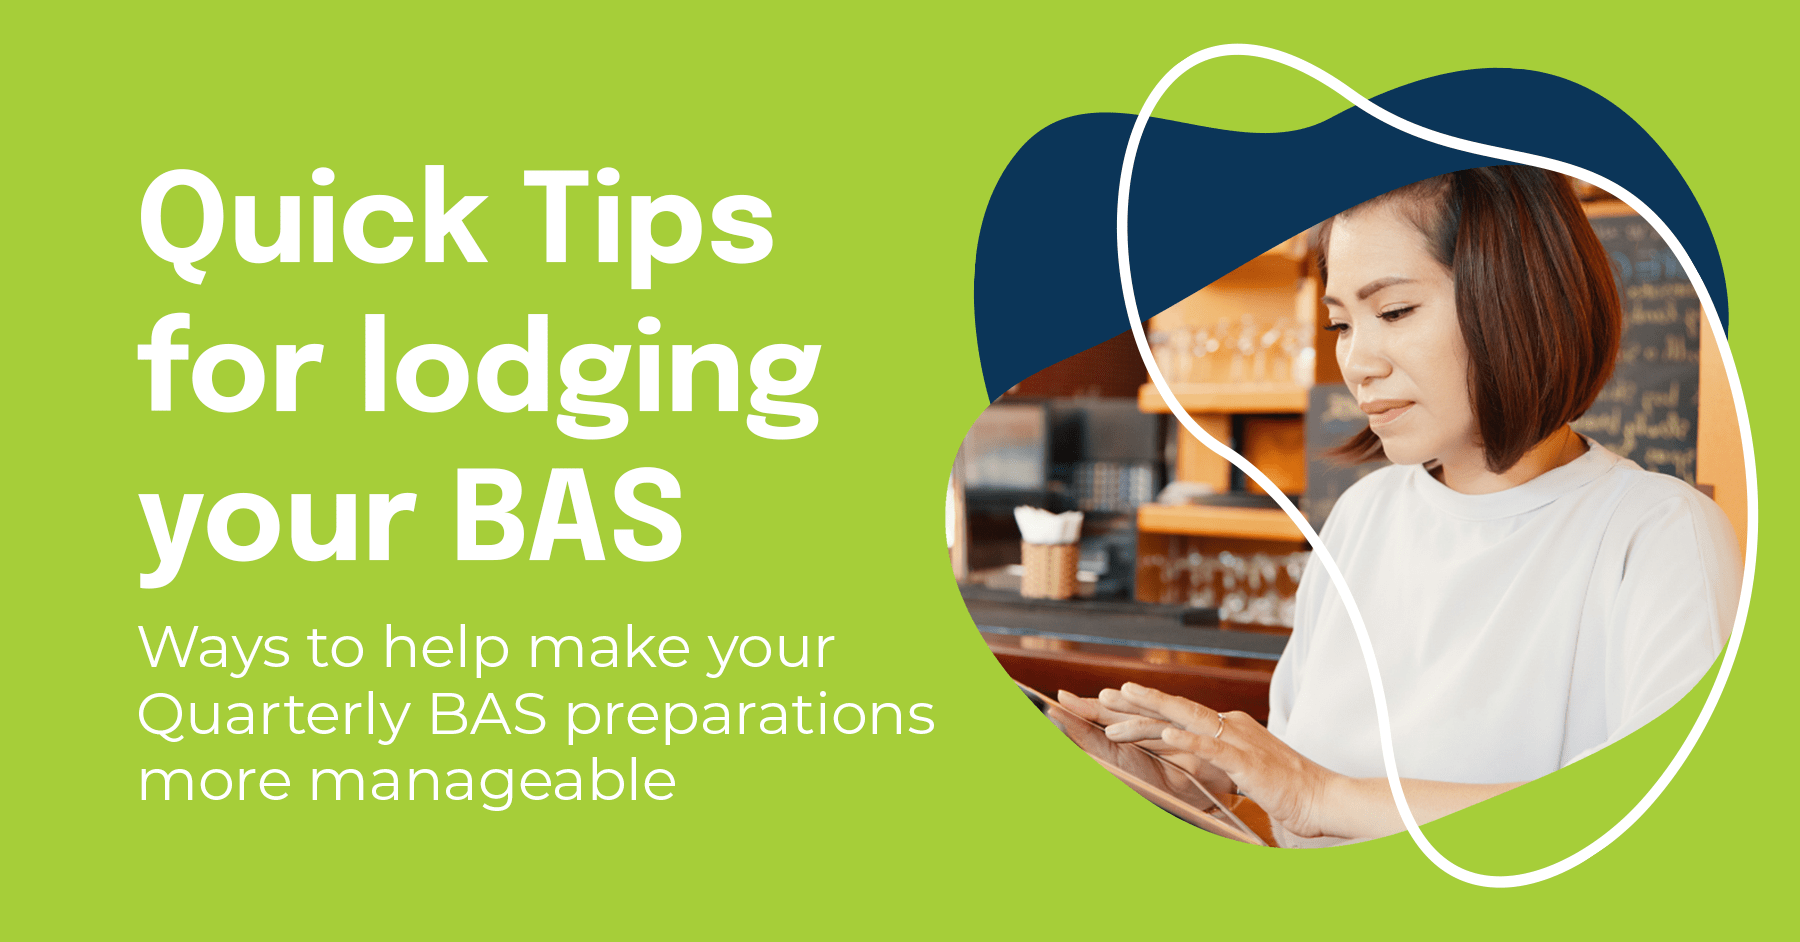 Quick tips to lodge your quarterly BAS